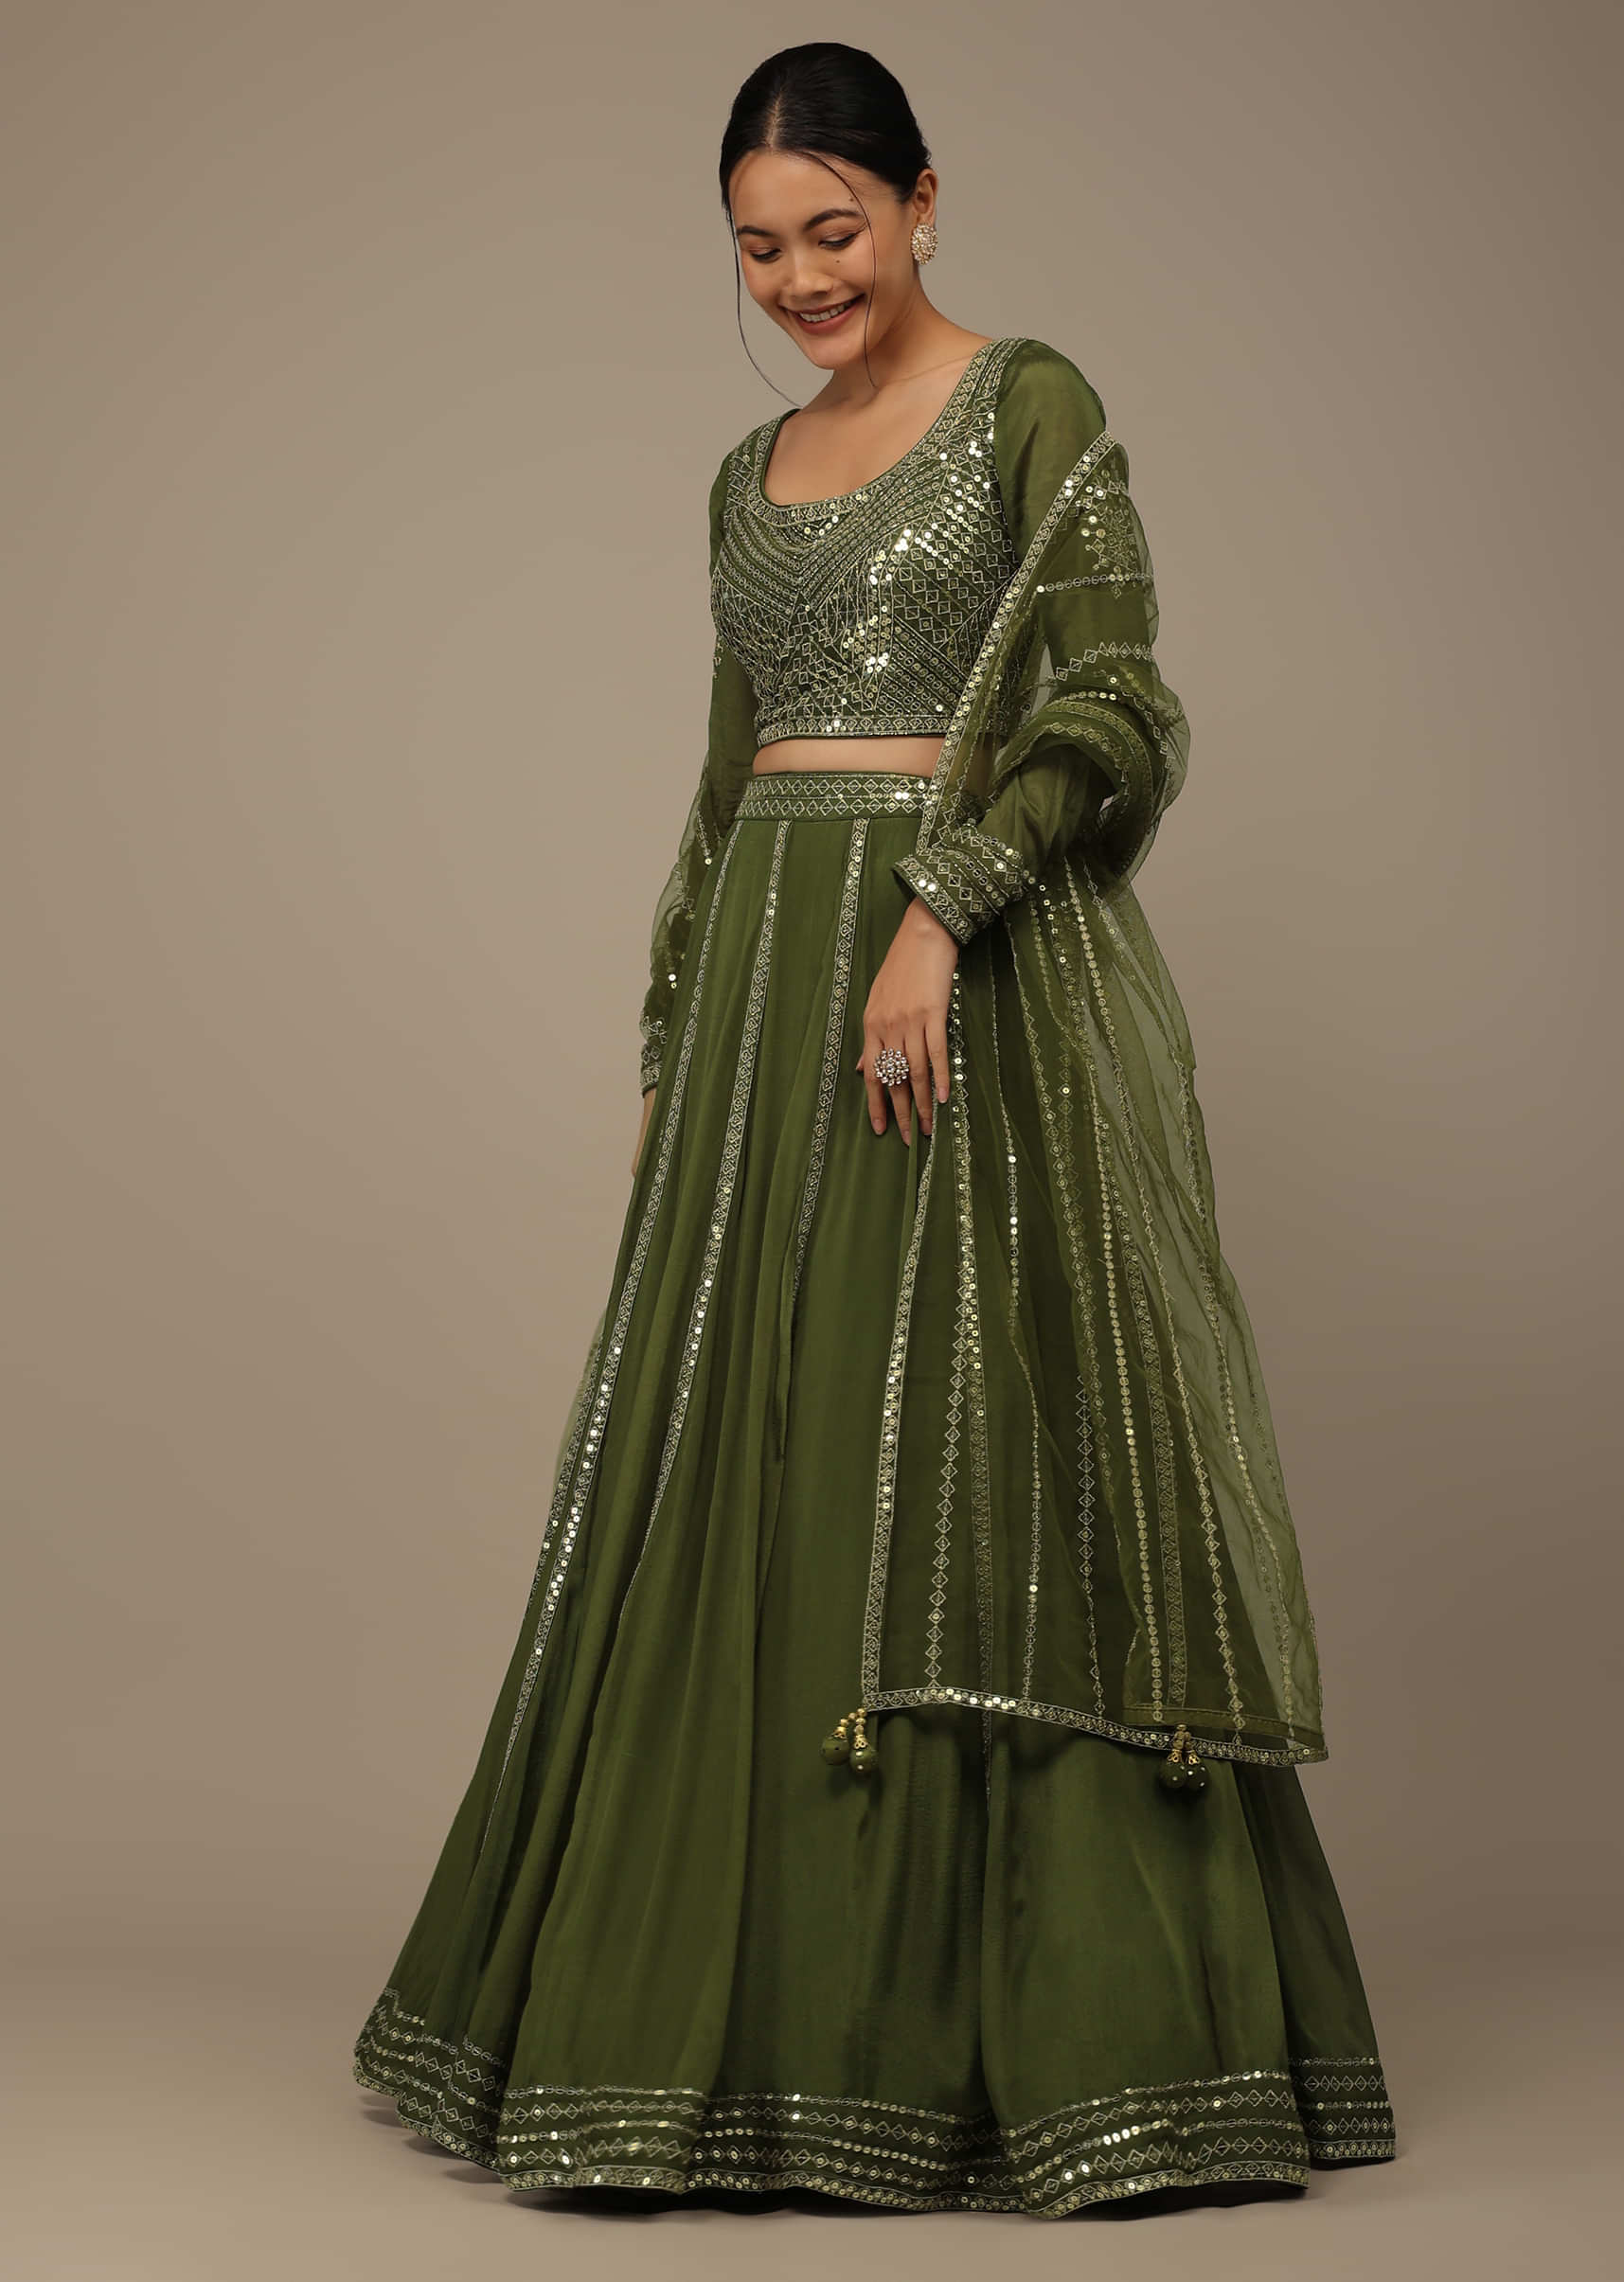 Lehenga Choli In Mint Green Color with Satin Blouse and Dupa